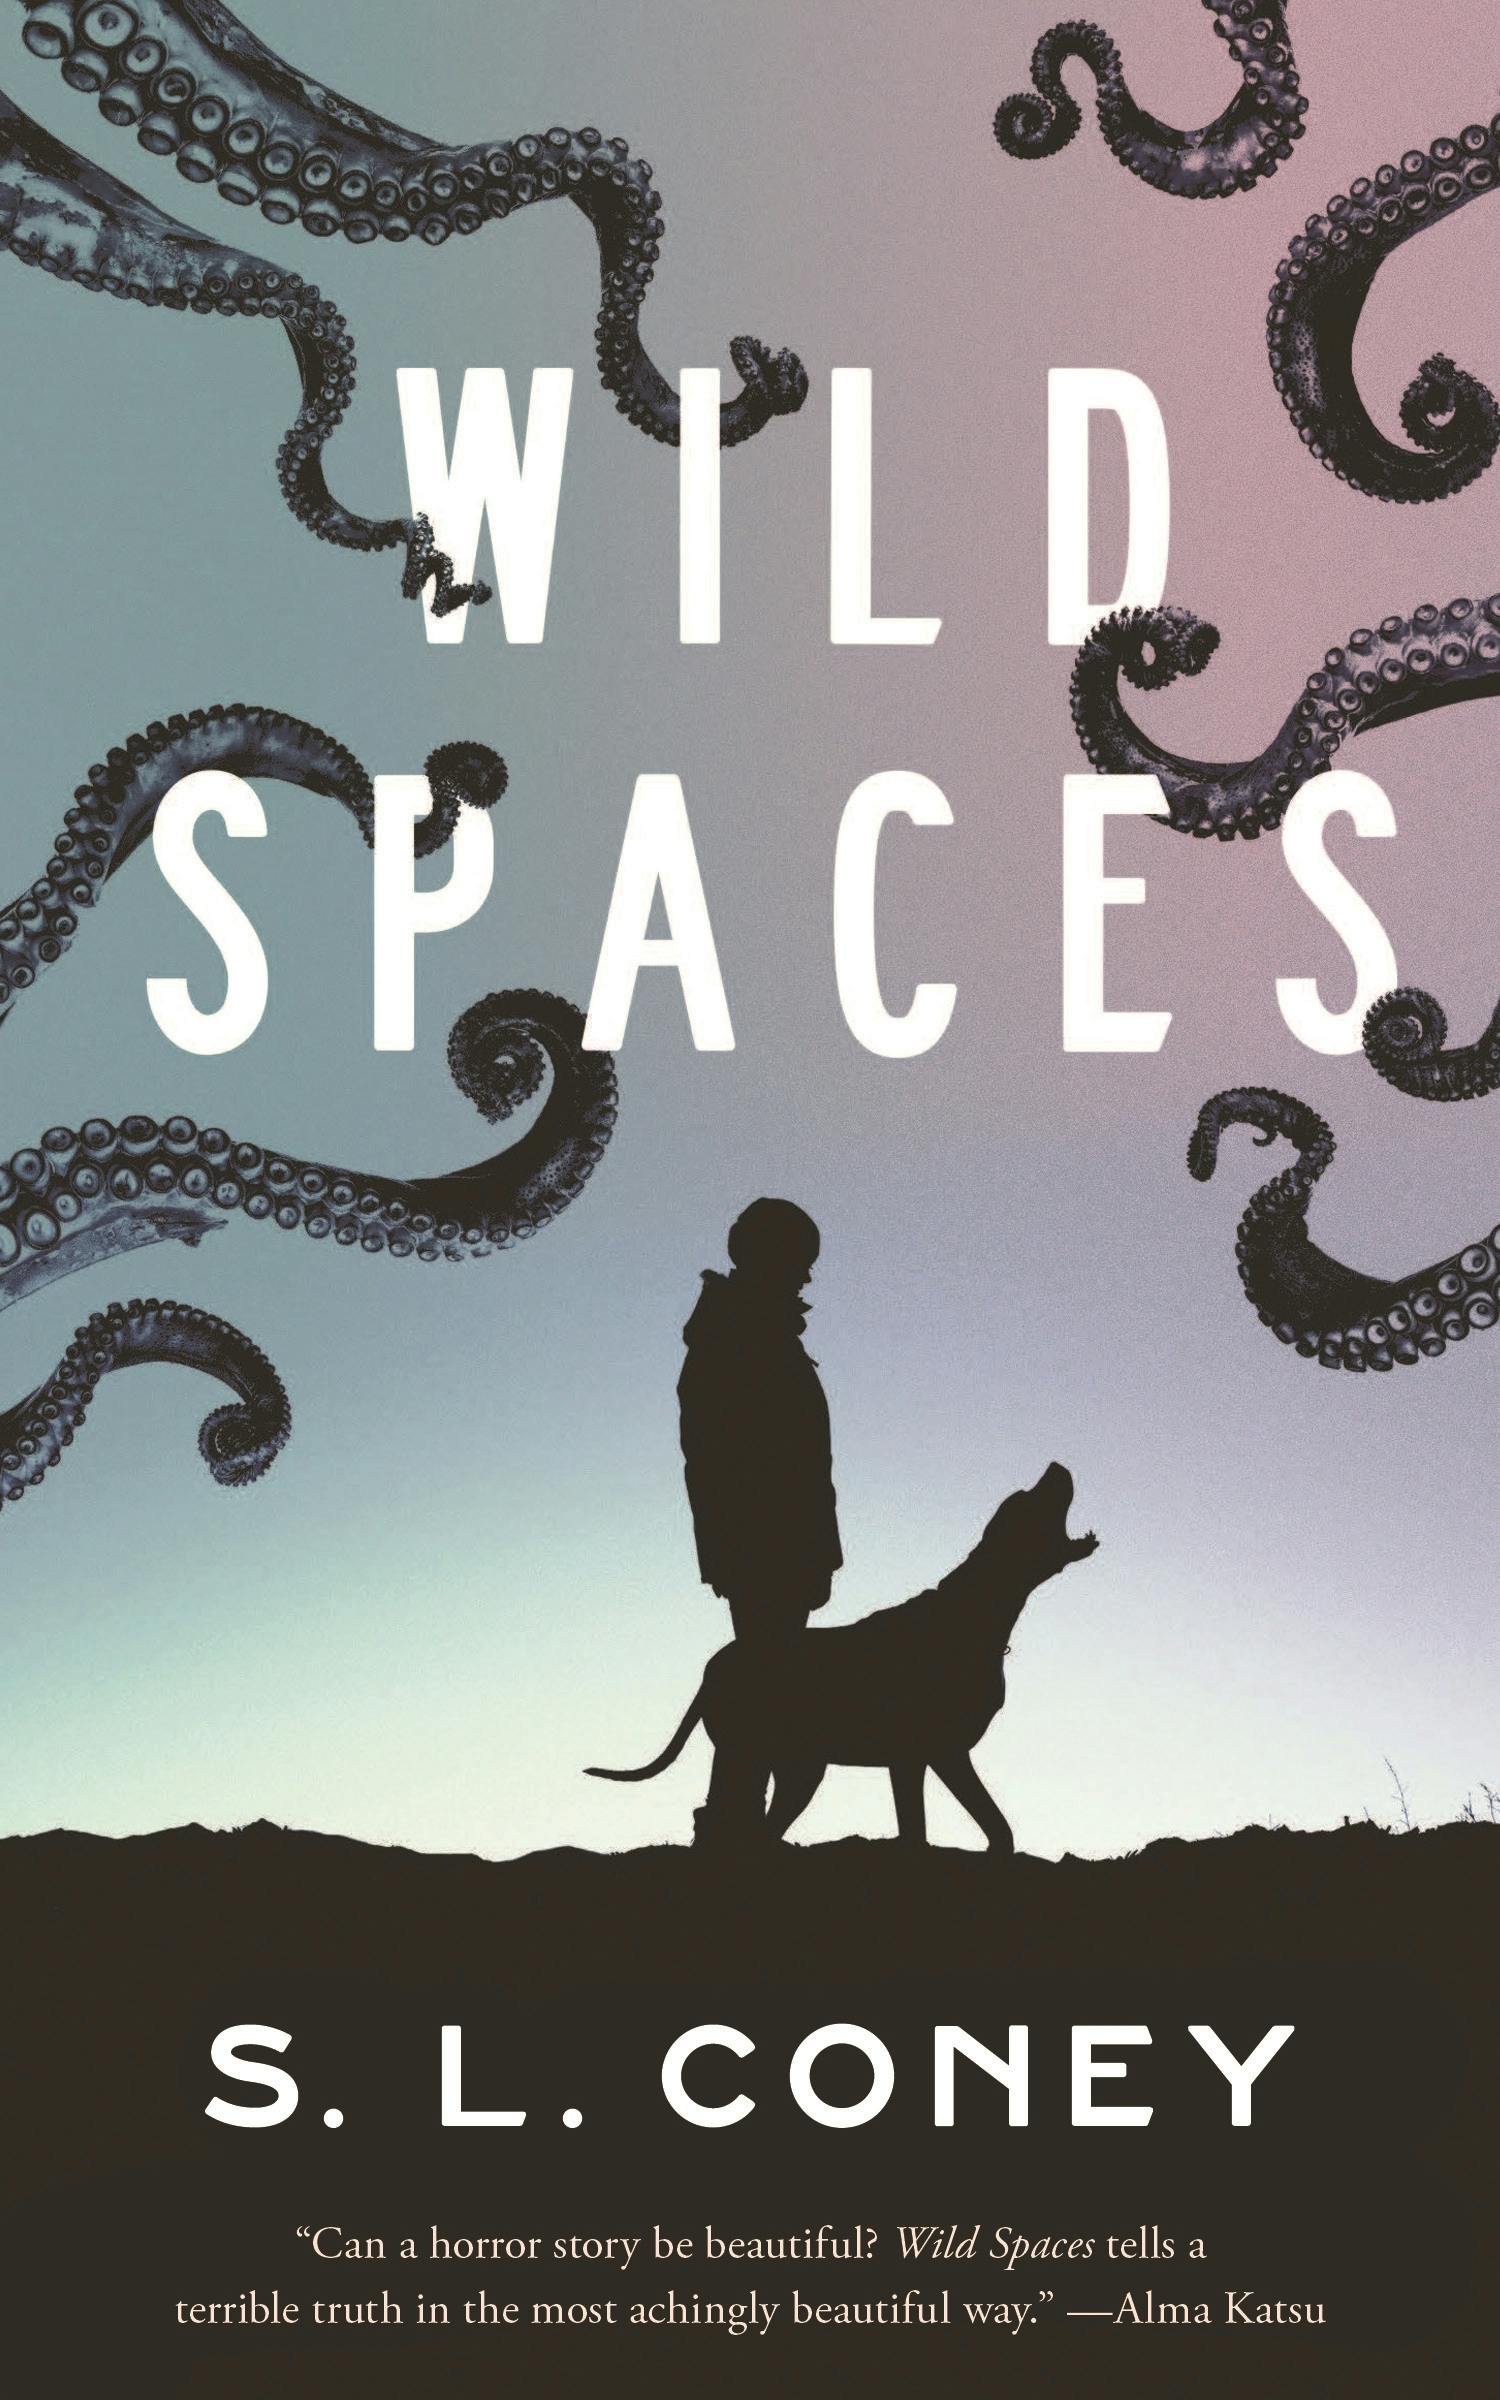 Cover for the book titled as: Wild Spaces